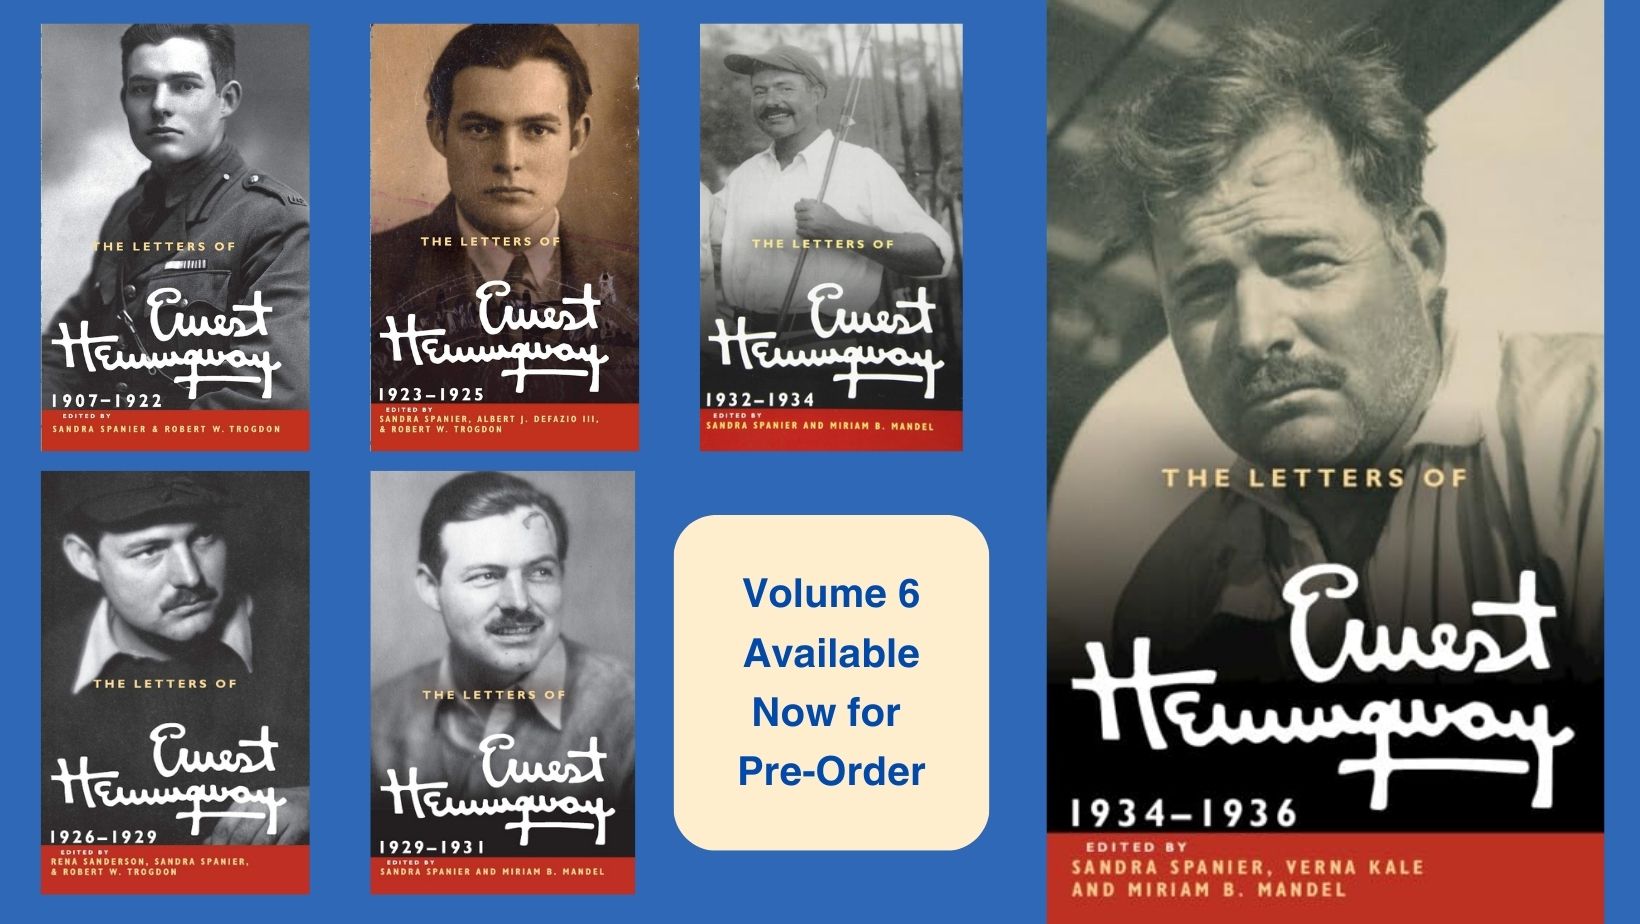 Image of 6 volumes of Hemingway's Letters